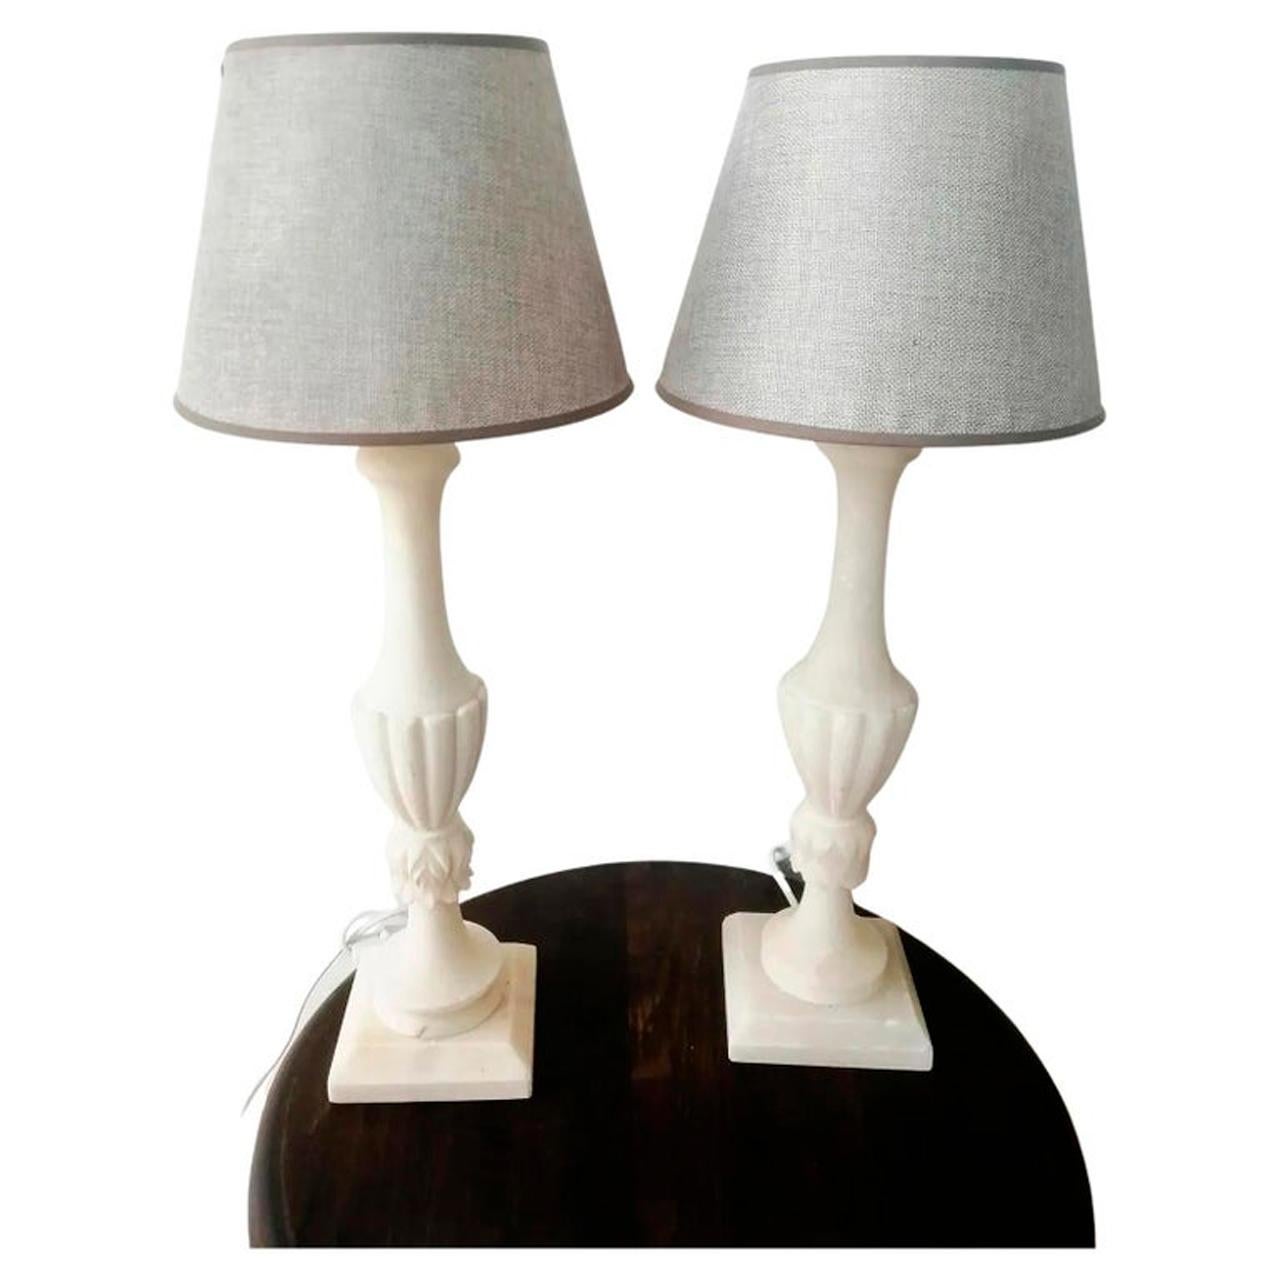  Extra Large Alabaster or Mrble Table Lamps  White Color 57 cm (without screens) In Excellent Condition For Sale In Mombuey, Zamora